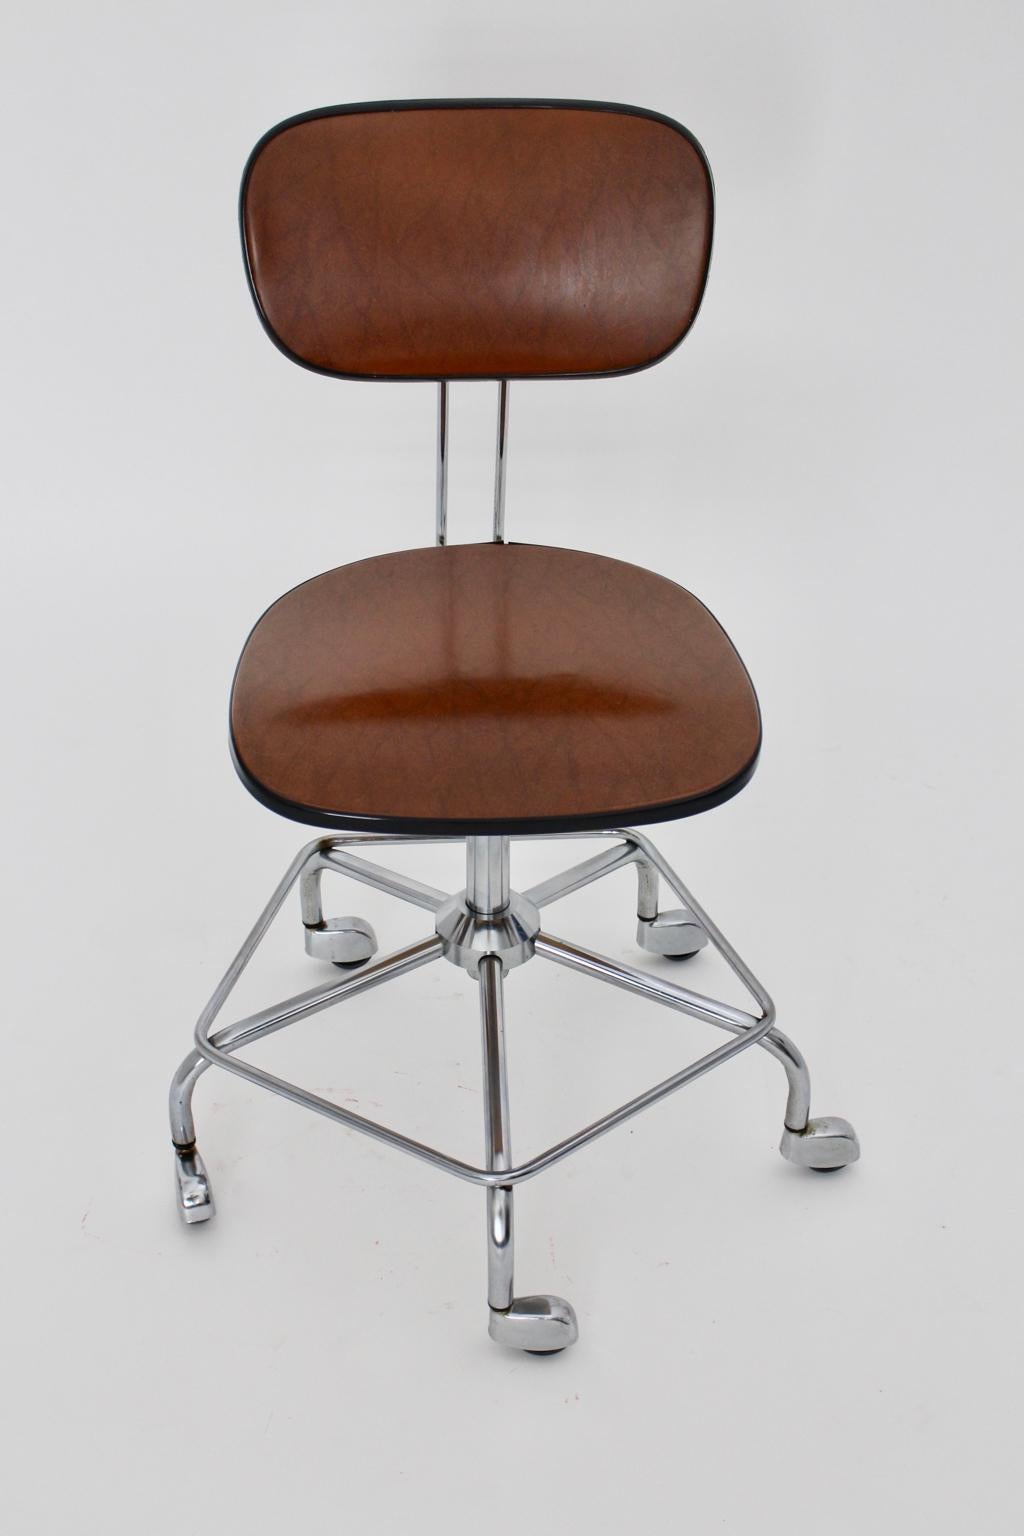 1950 office chair